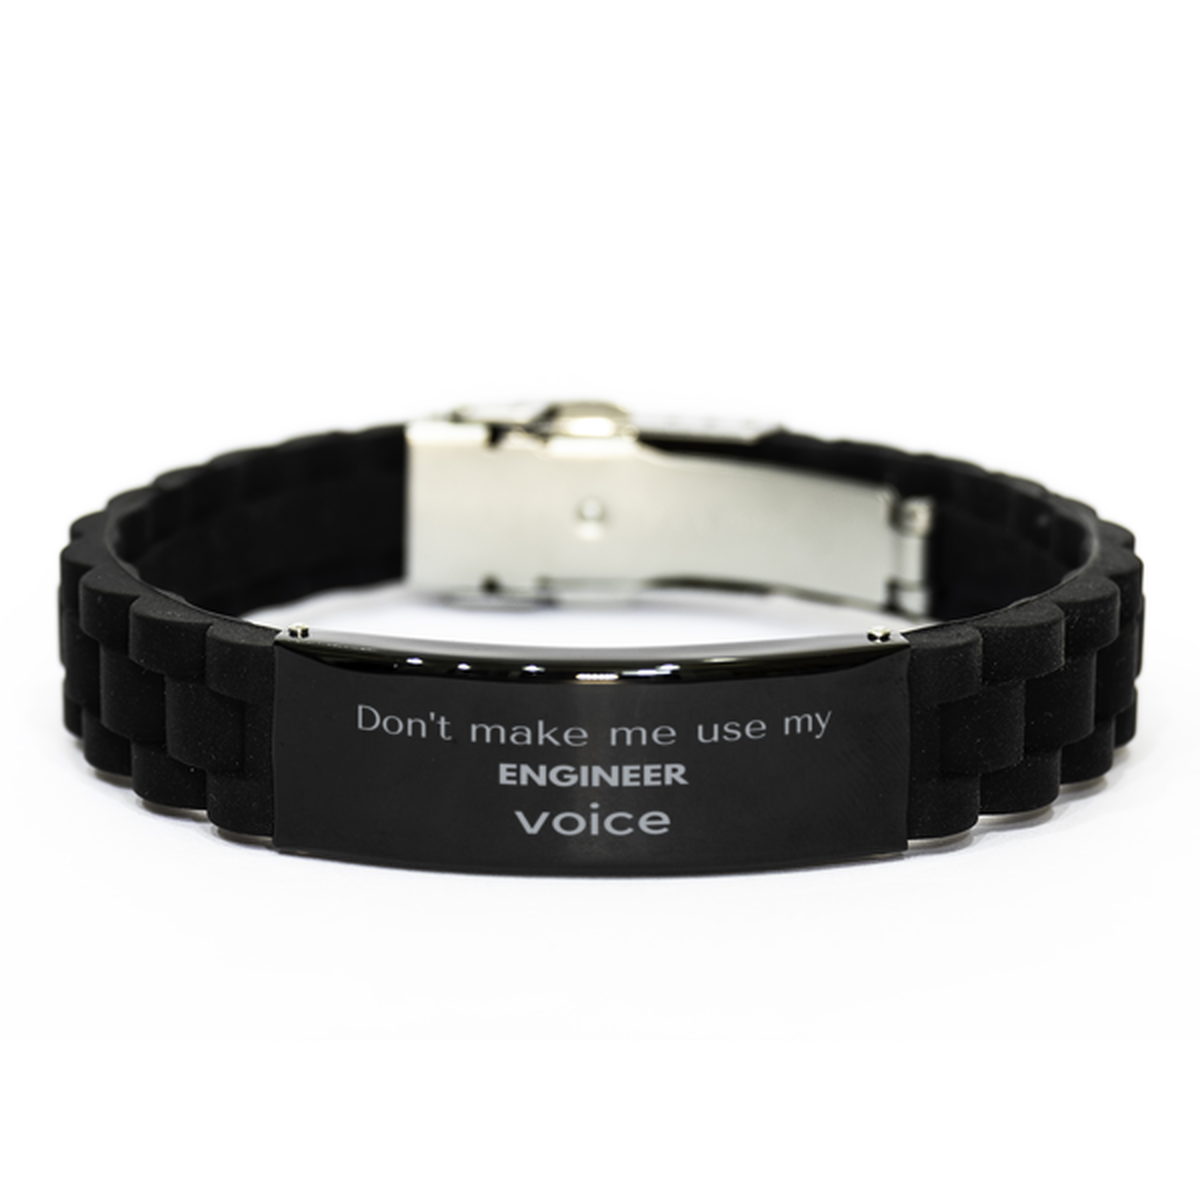 Don't make me use my Engineer voice, Sarcasm Engineer Gifts, Christmas Engineer Black Glidelock Clasp Bracelet Birthday Unique Gifts For Engineer Coworkers, Men, Women, Colleague, Friends